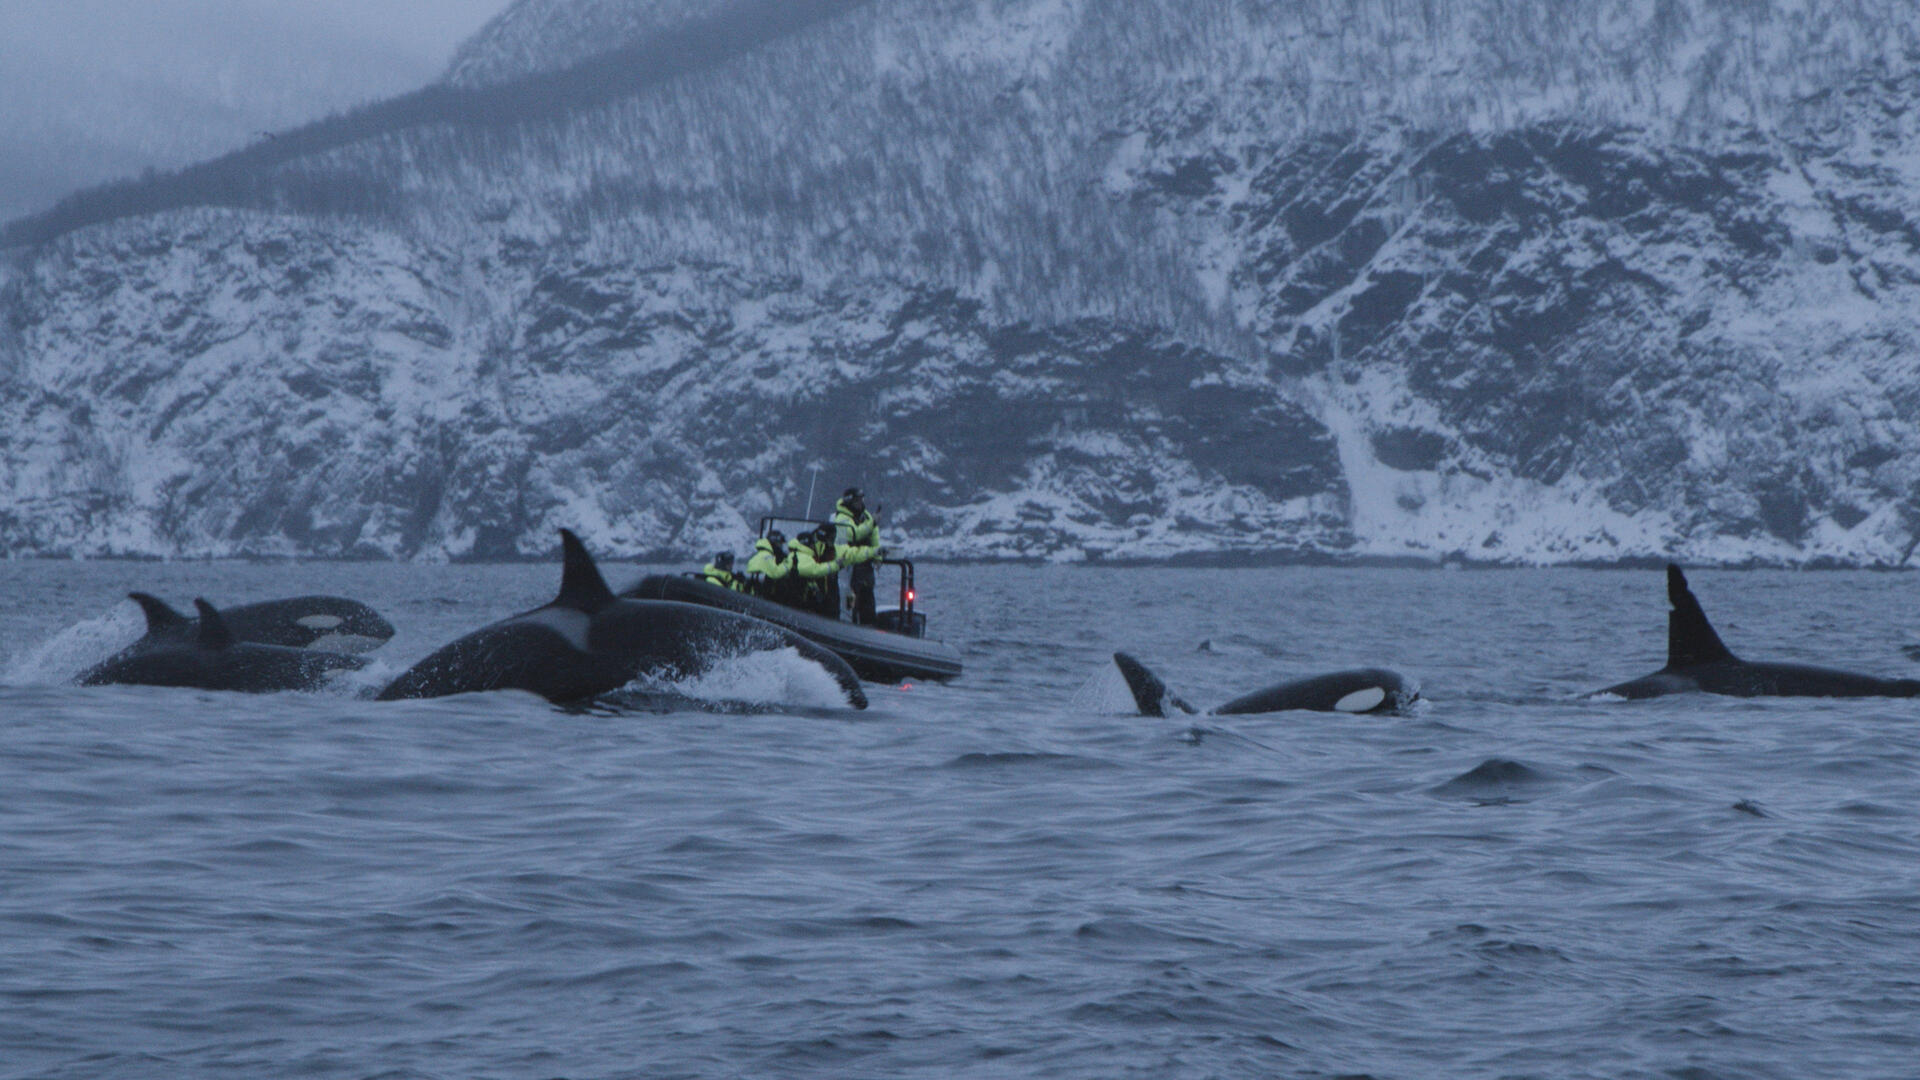 A_pod_of_orcas_and_a_whale-watching_tour_boat_in_a_Norwegian_fjord